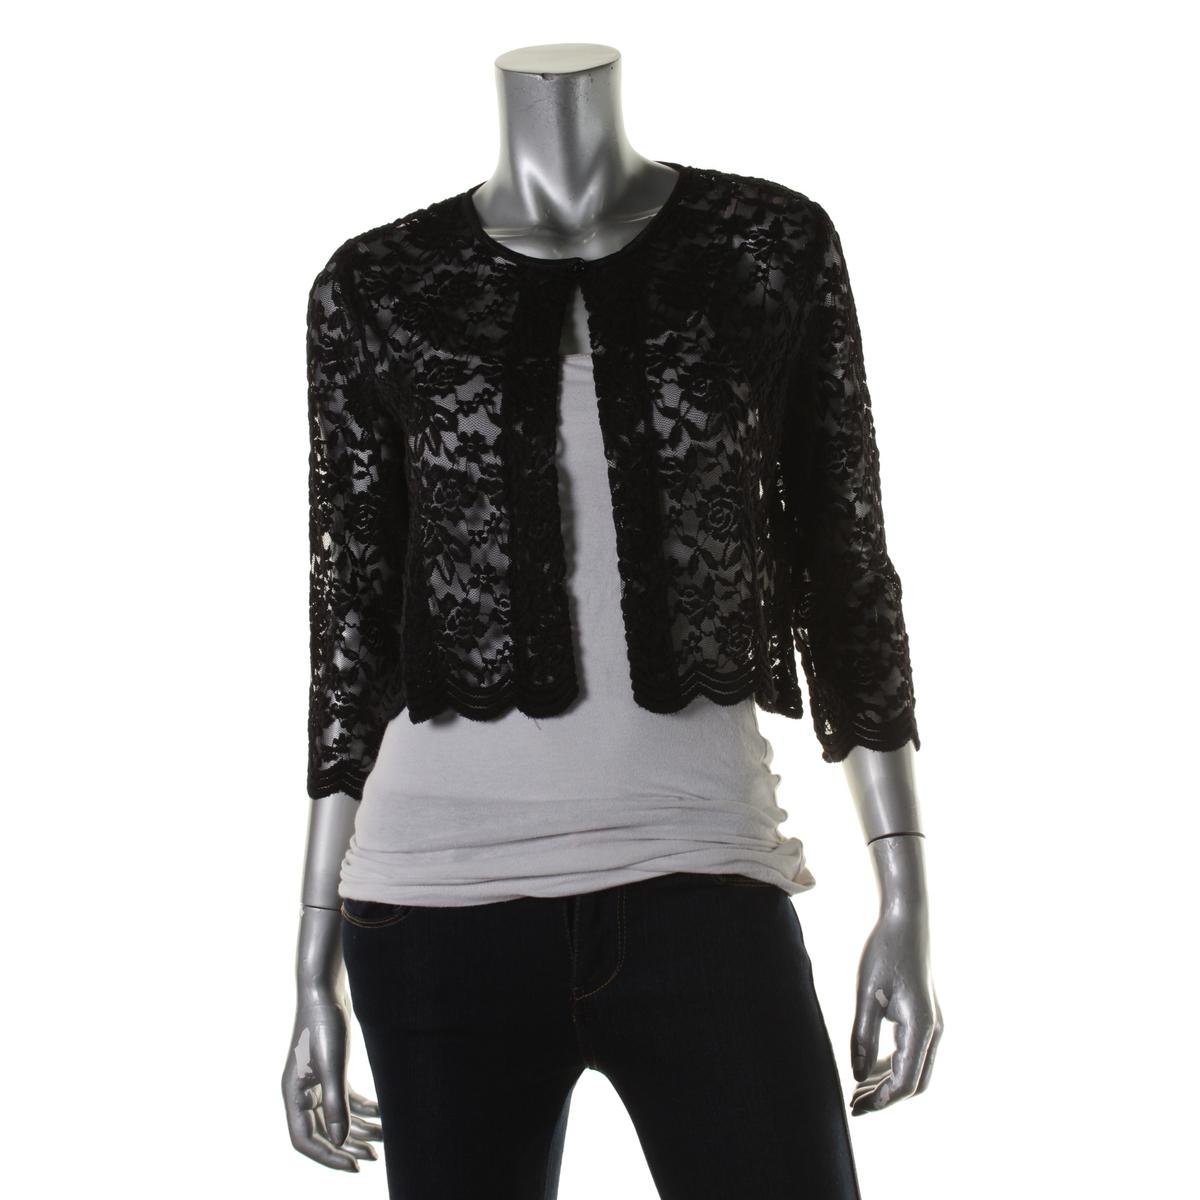 Connected Apparel 4946 Womens Black Lace Crop Cardigan Top Petites PM BHFO